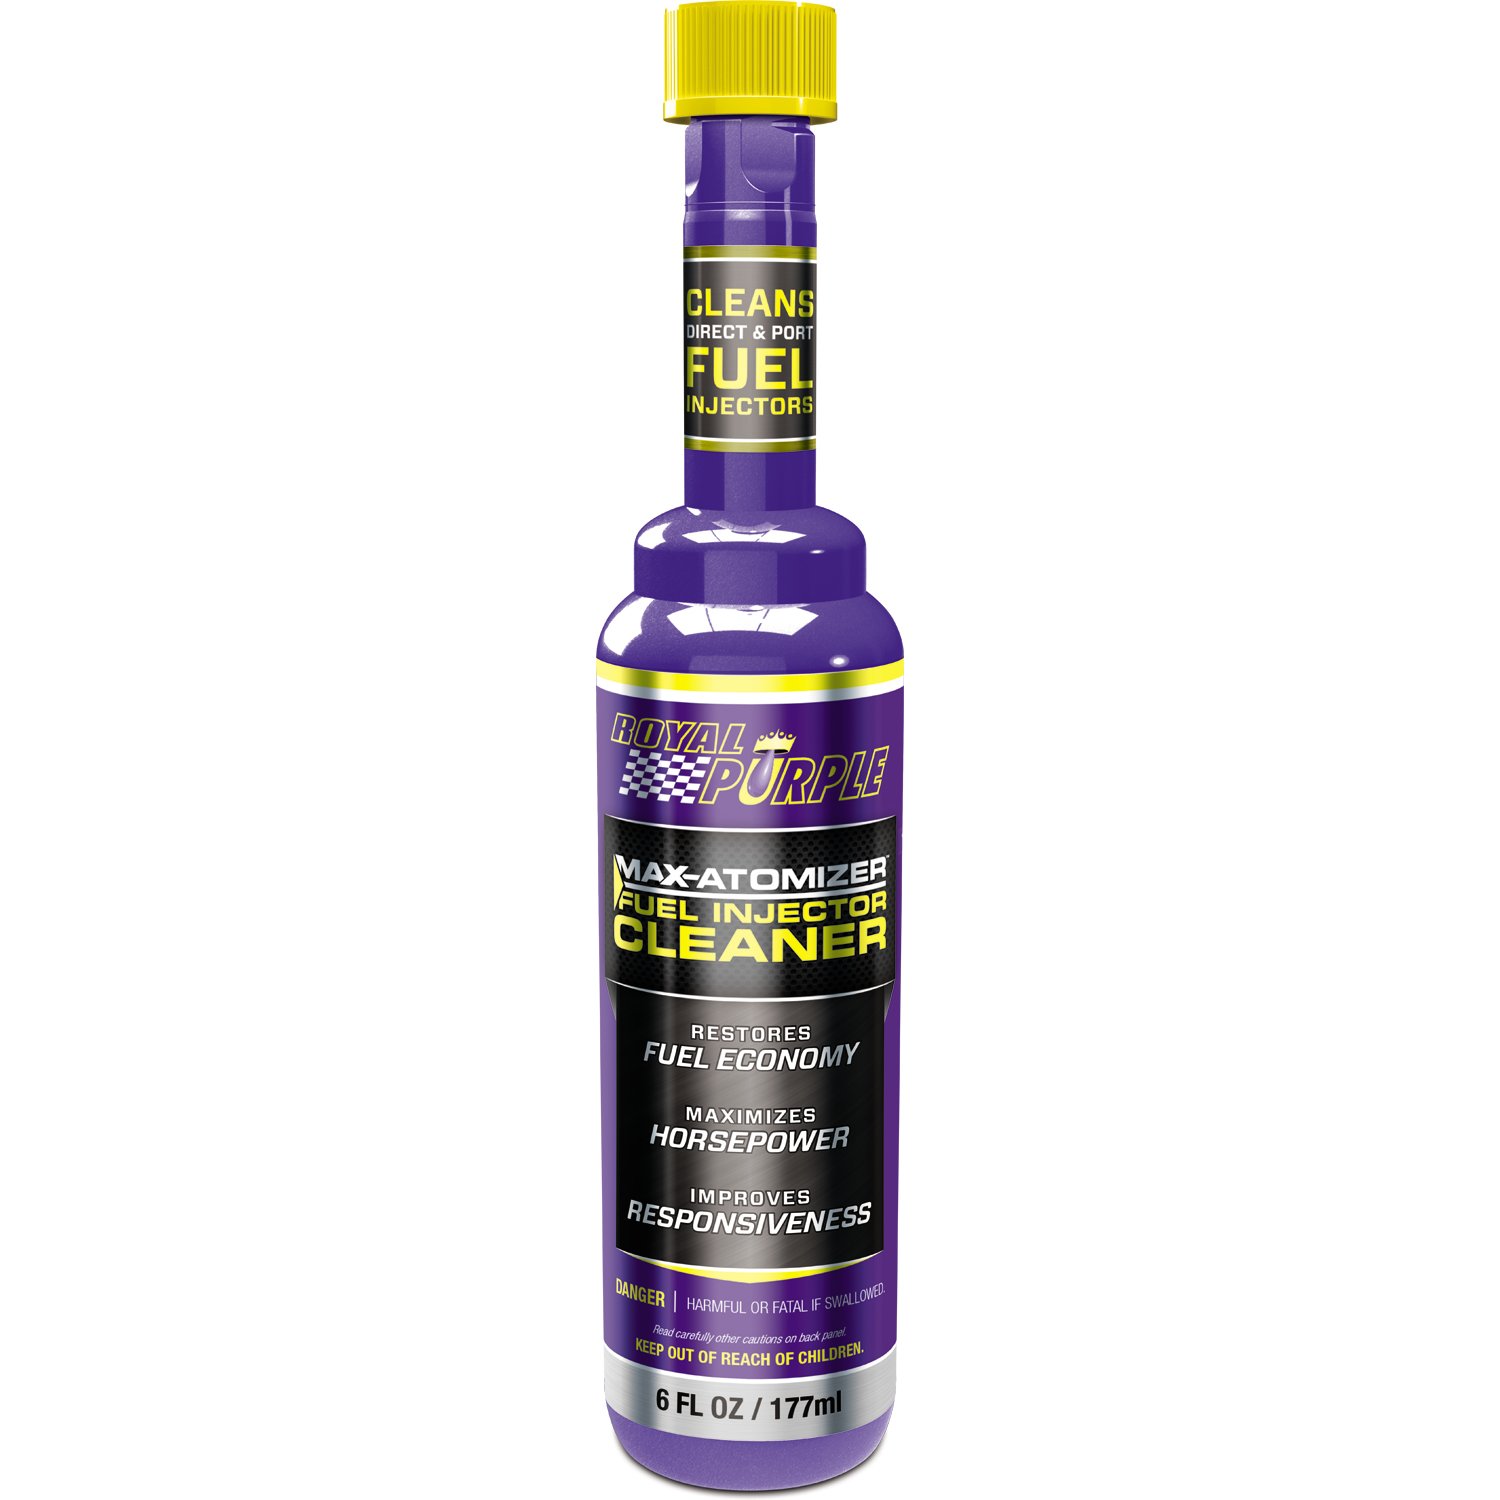 Max-Atomizer Fuel Injector Cleaner (1) 6oz Bottle